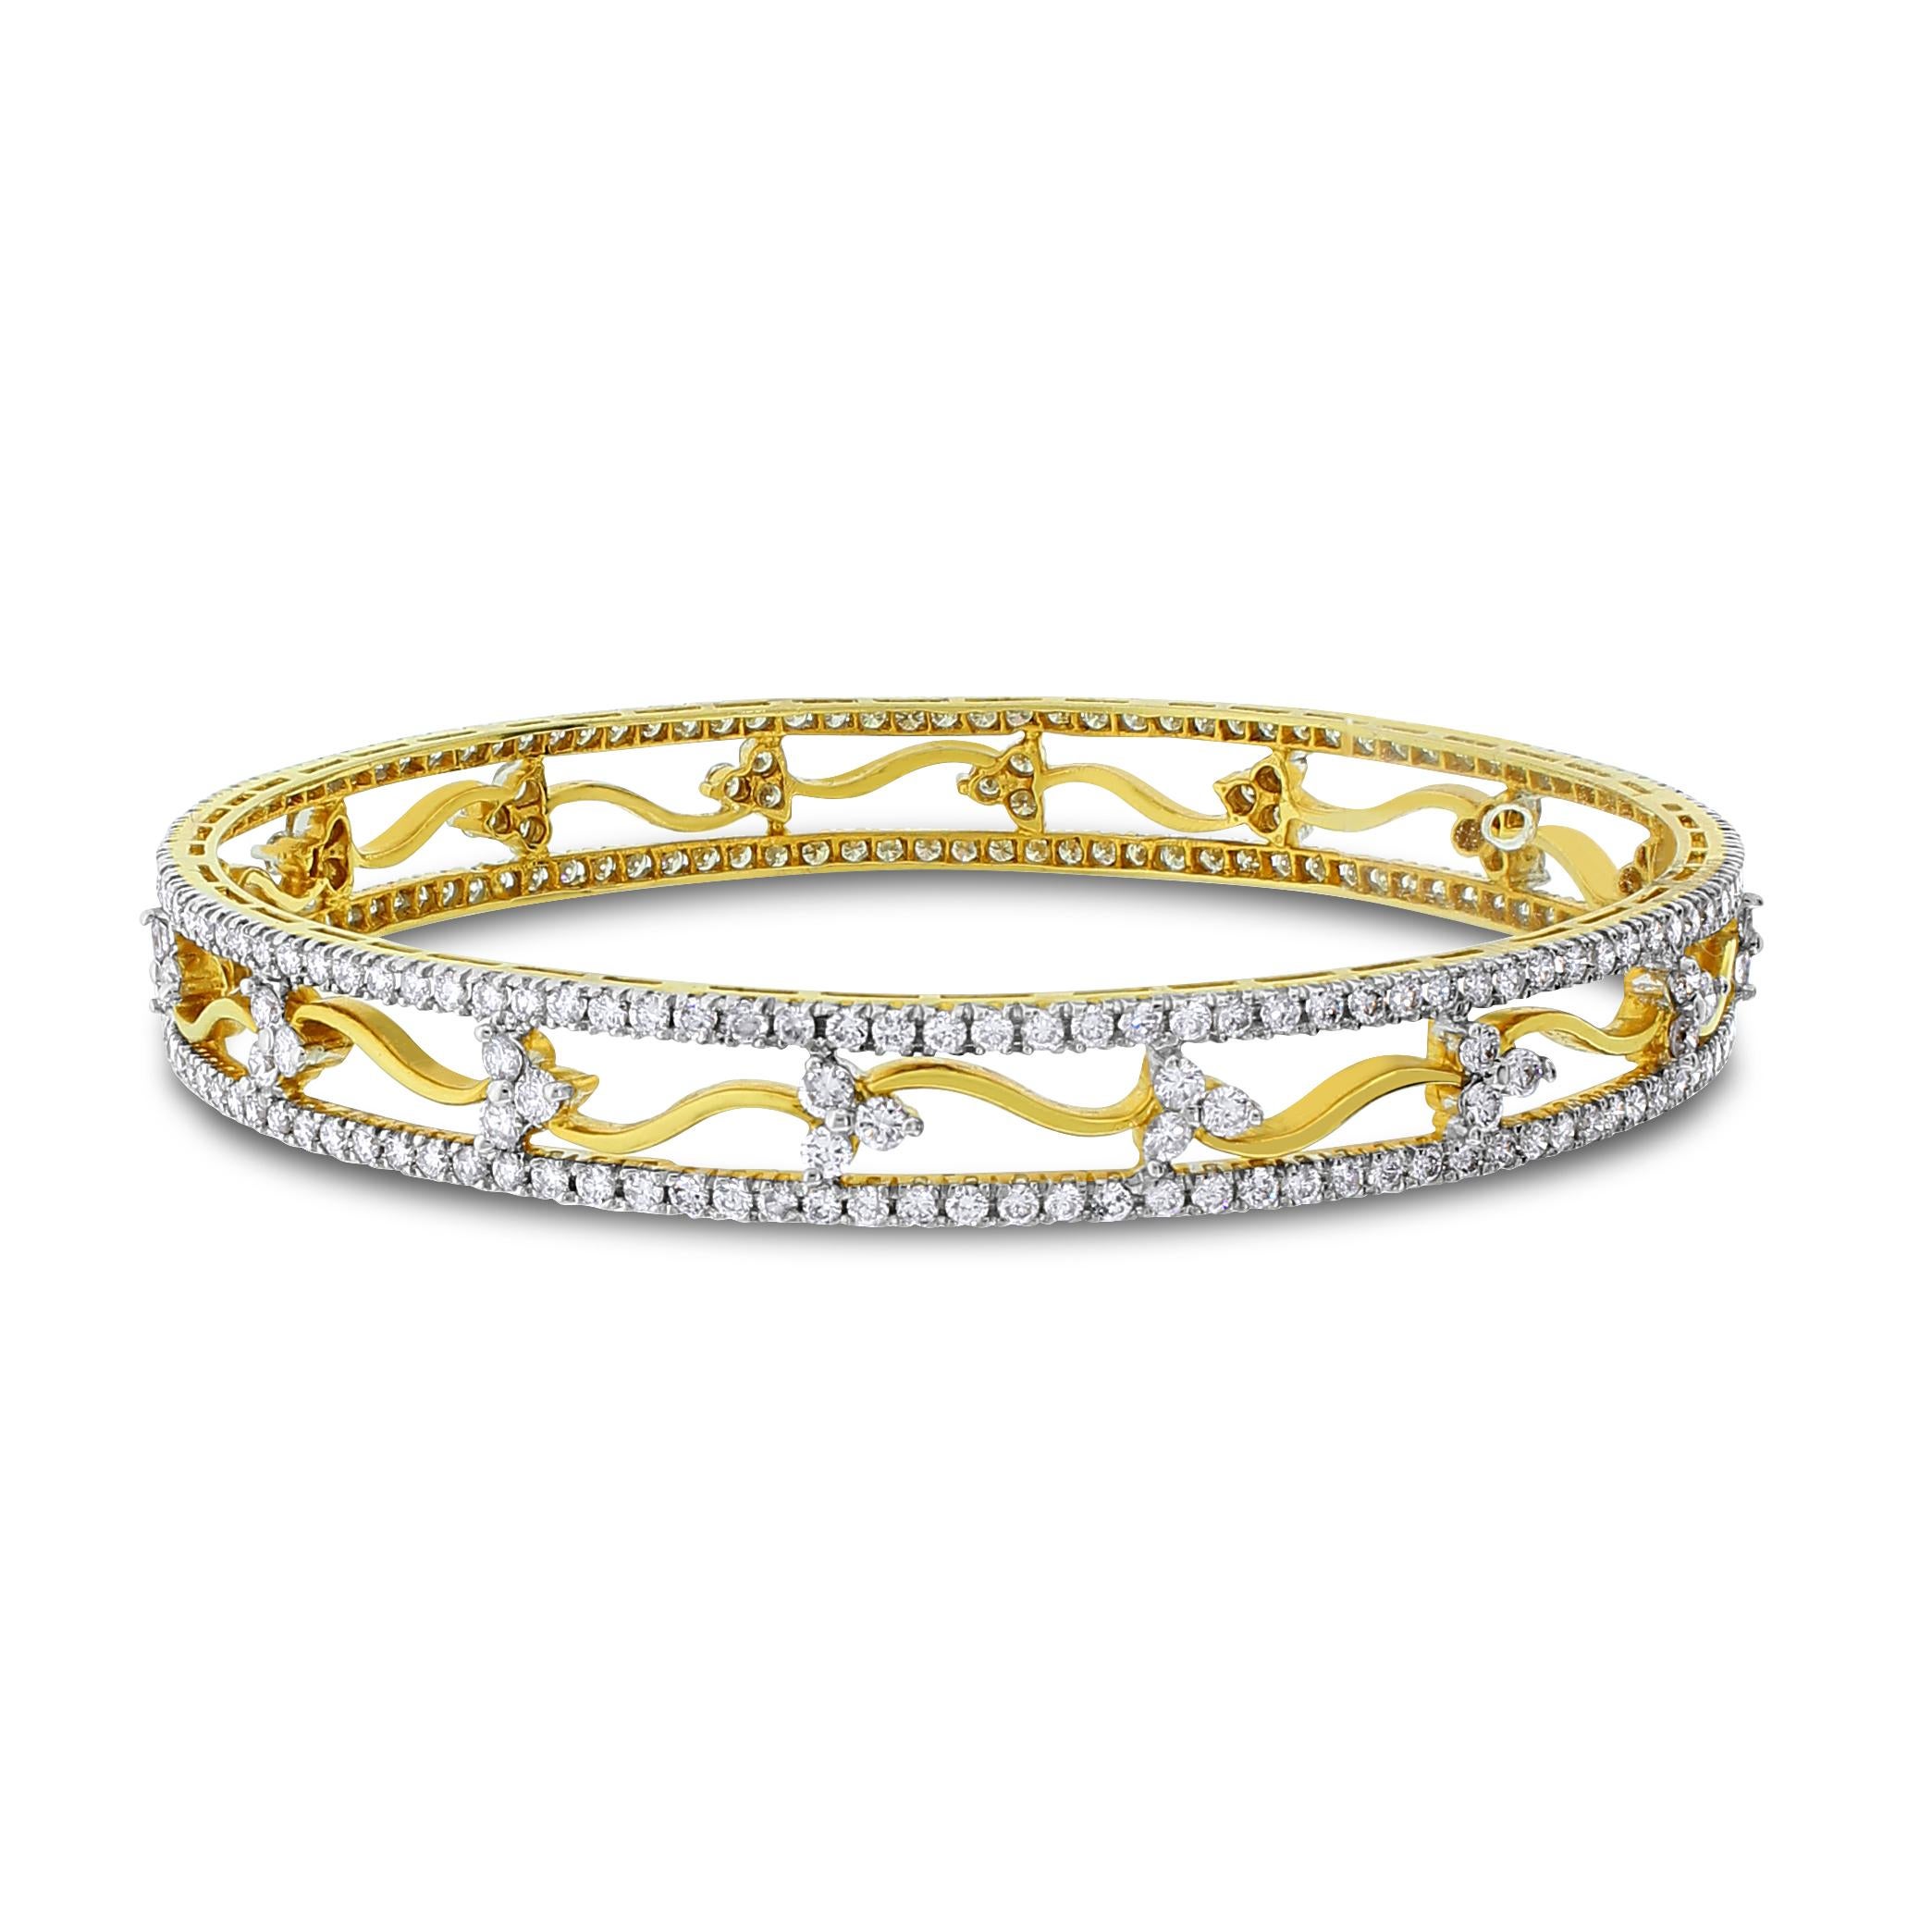 Beauvince Sheena Diamond Bangles '10.59 ct Diamonds' in 18K Gold In New Condition For Sale In New York, NY